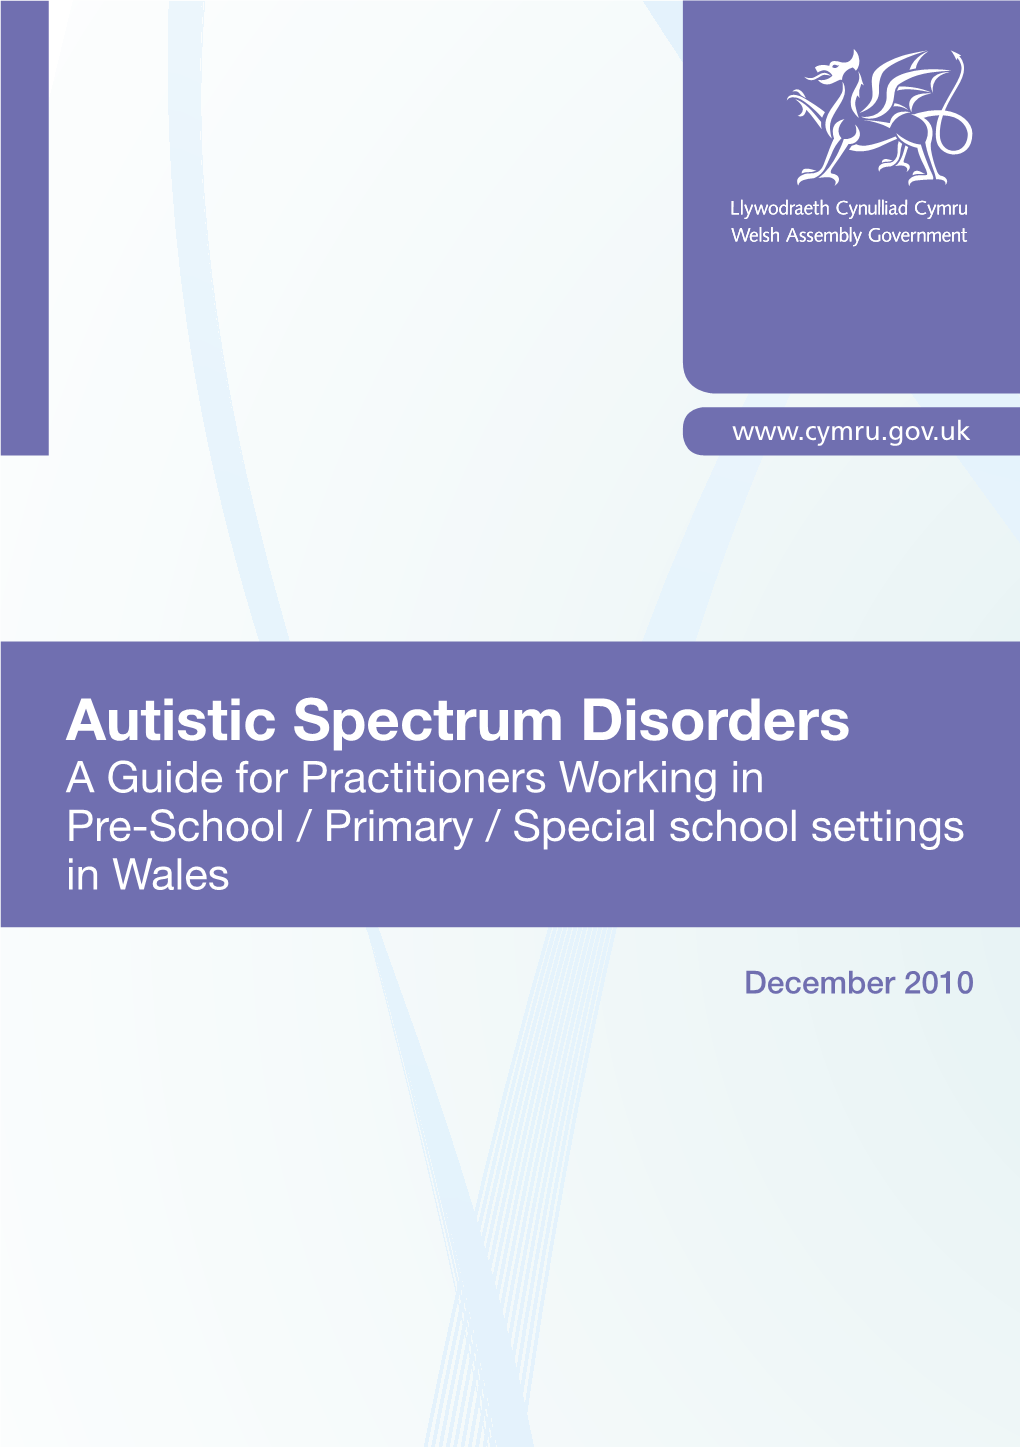 Autistic Spectrum Disorders a Guide for Practitioners Working in Pre-School / Primary / Special School Settings in Wales